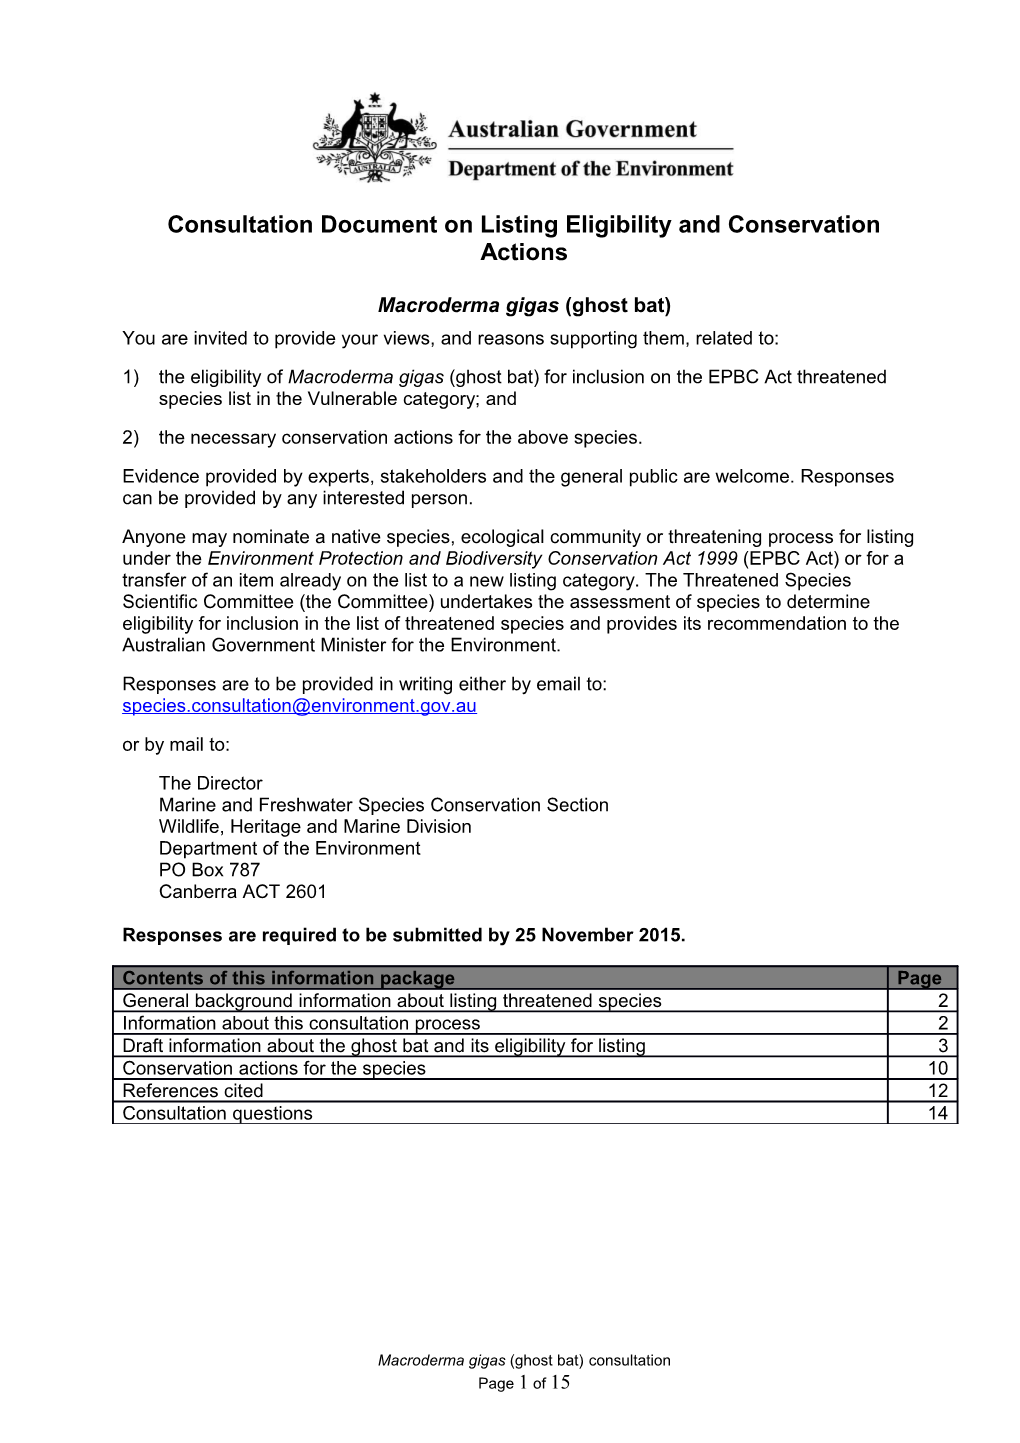 Consultation Document on Listing Eligibility and Conservation Actions Macroderma Gigas